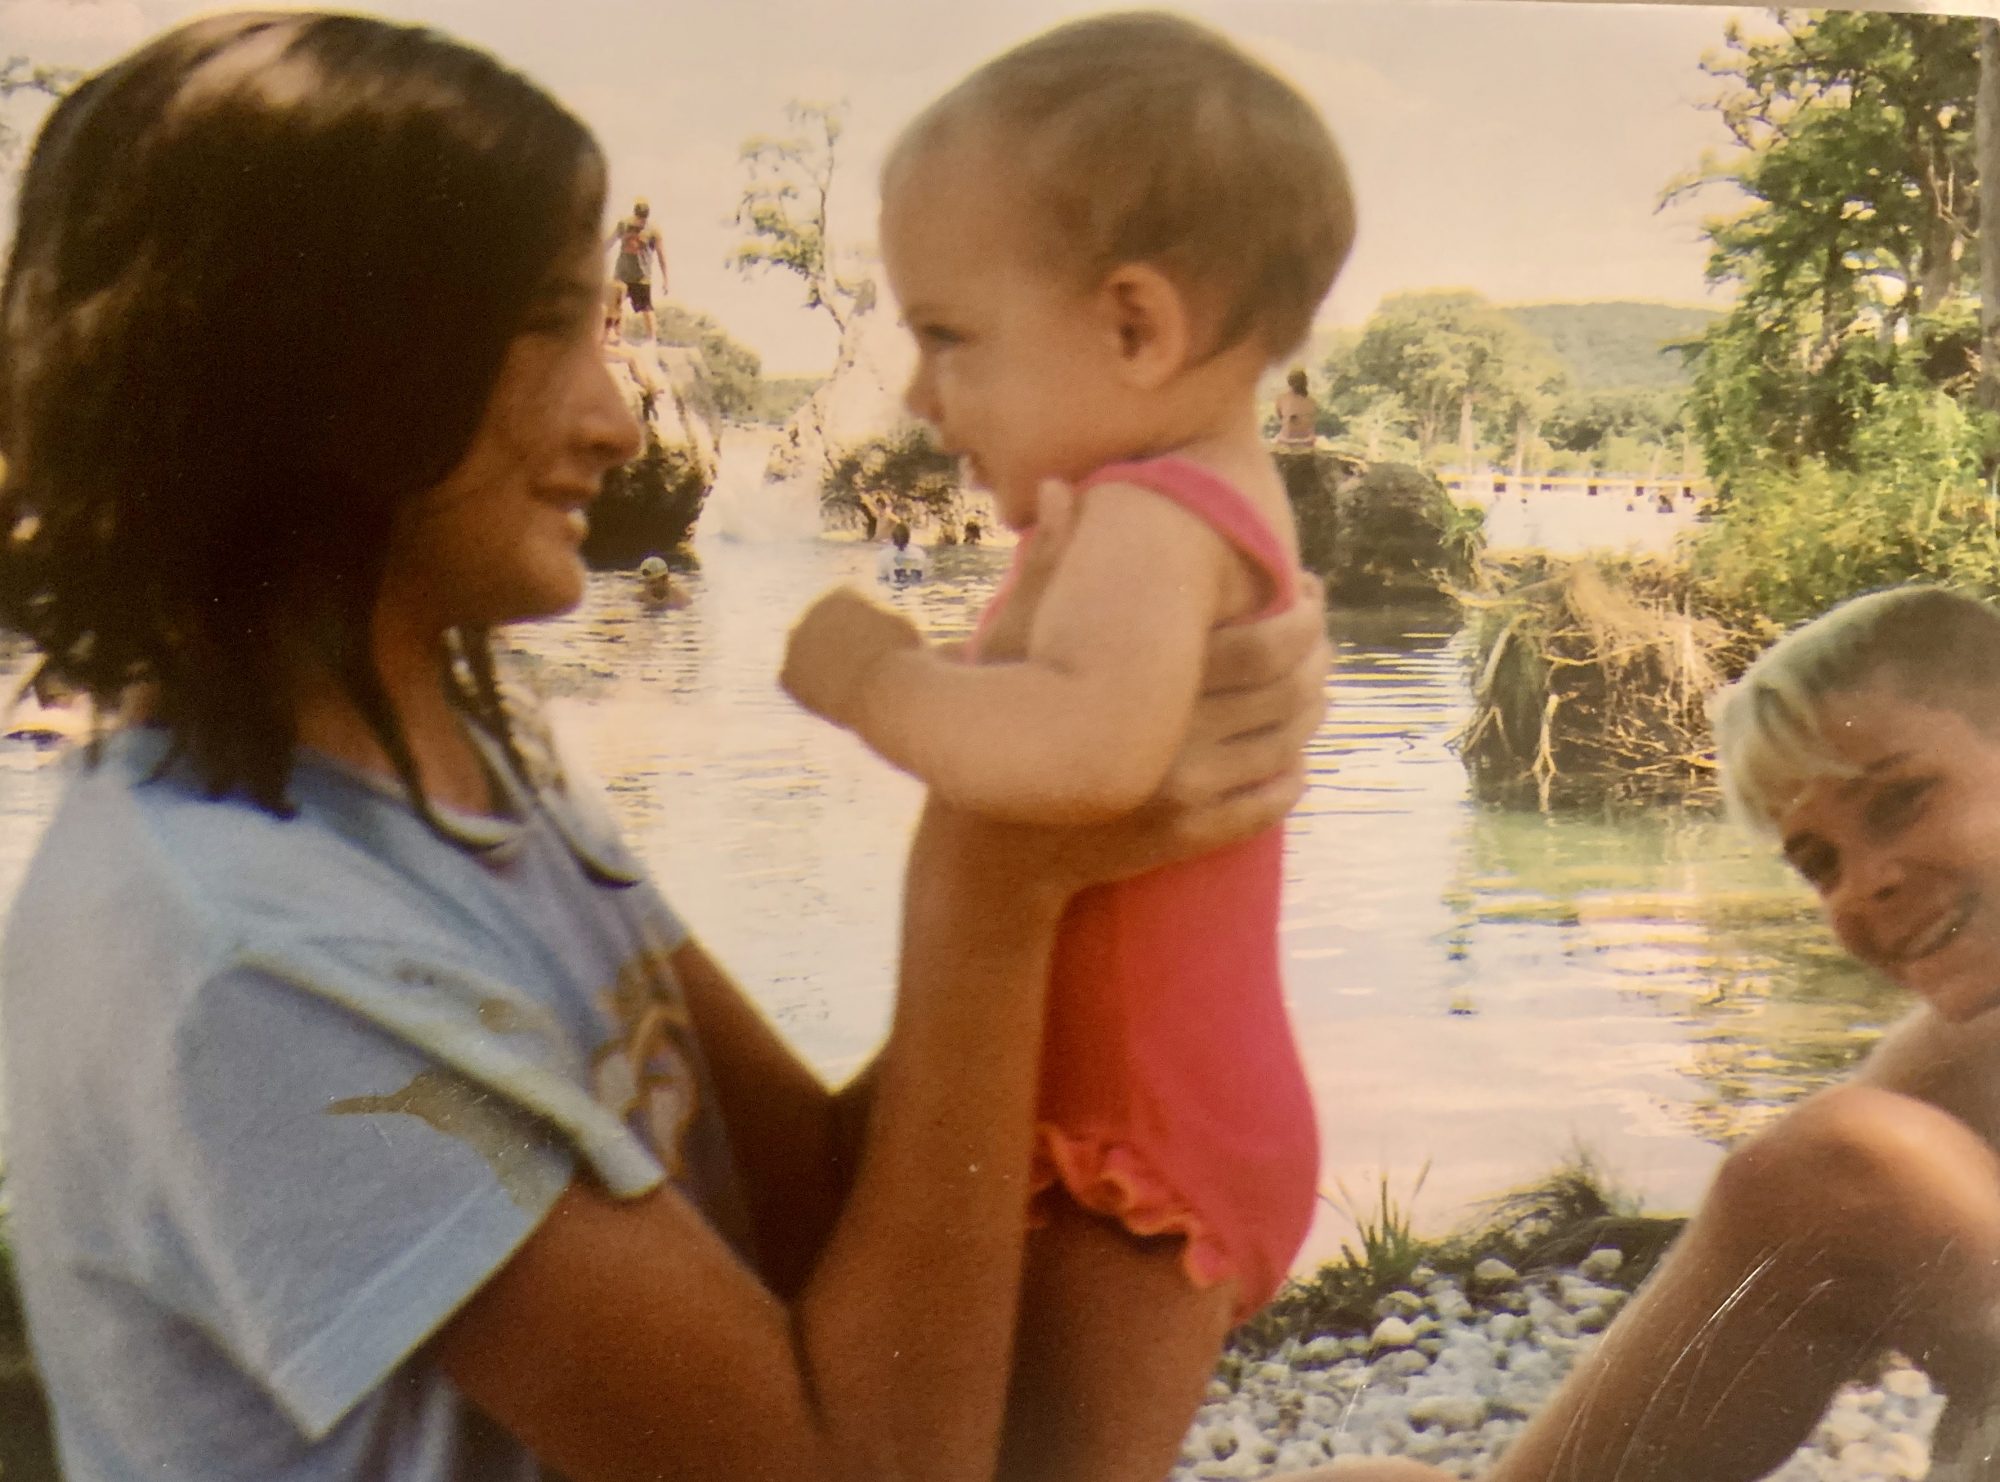 A woman holds a baby near the Frio River of Texas